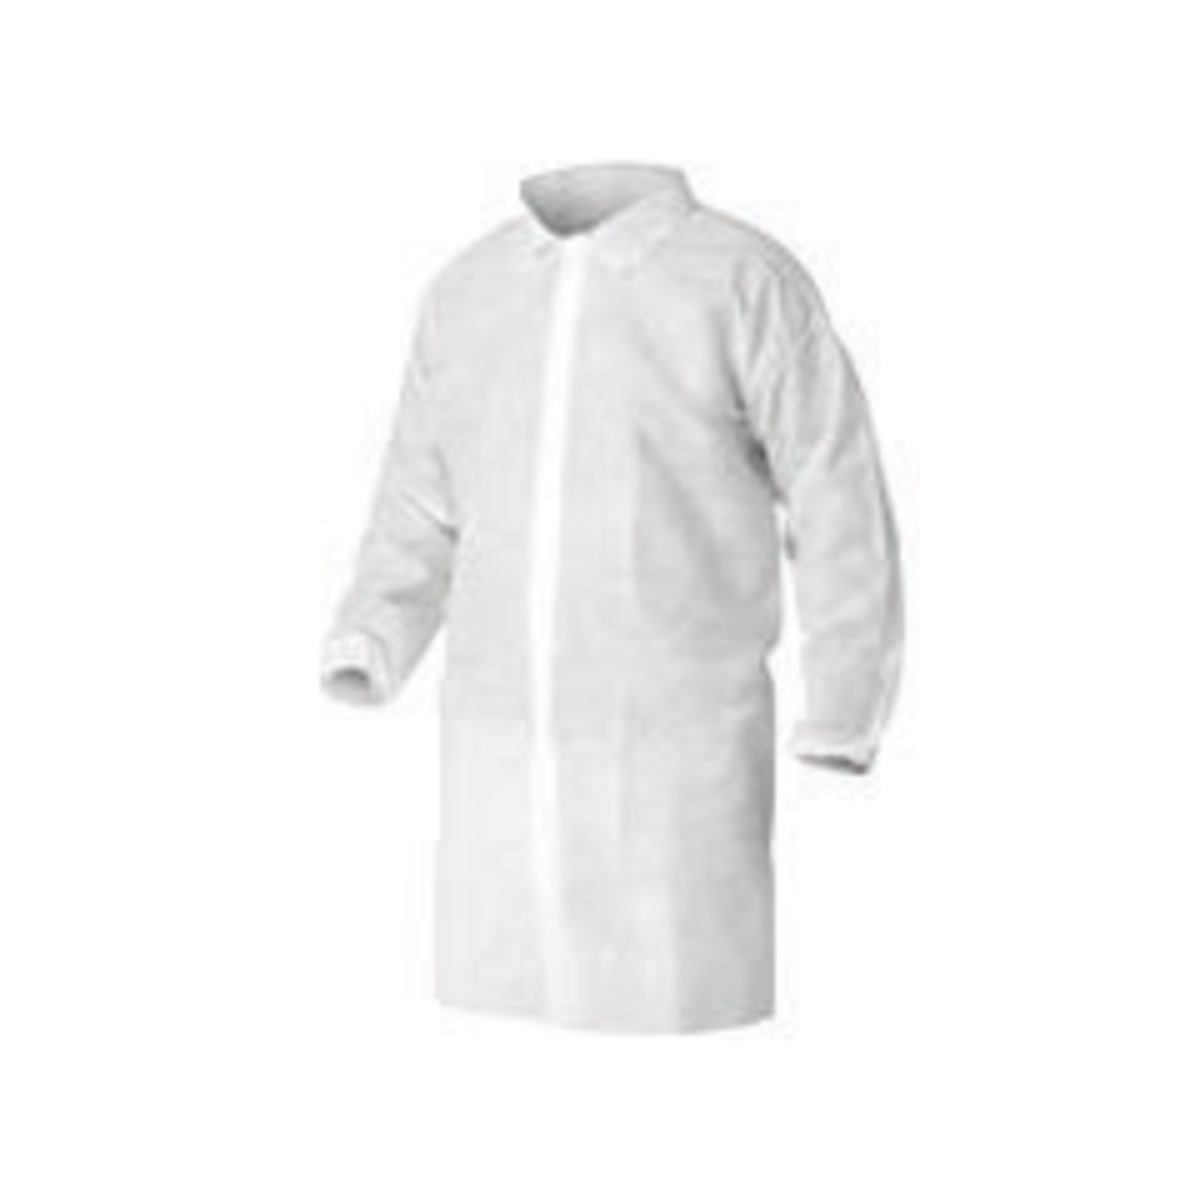 Kimberly-Clark Professional™ 2X White KleenGuard™ A10 Polypropylene Disposable Lab Coat (Availability restrictions apply.)